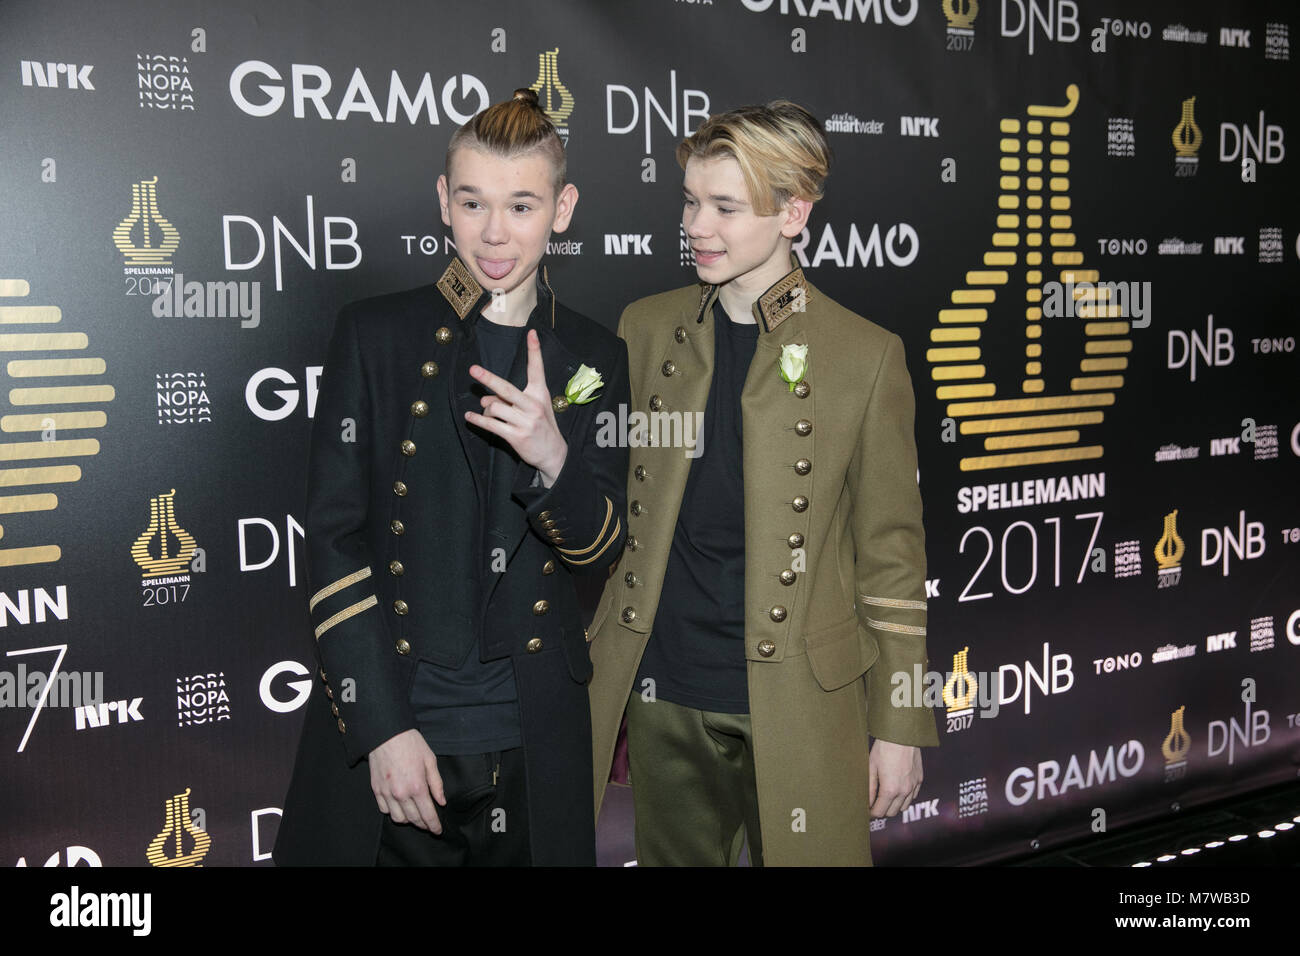 Norway, Oslo - February 25, 2018. The Norwegian pop duo Marcus & Martinus at the red carpet at the Norwegian Grammy Awards, Spellemannprisen 2017, in Oslo. (Photo credit: Gonzales Photo - Stian S. Moller). Stock Photo